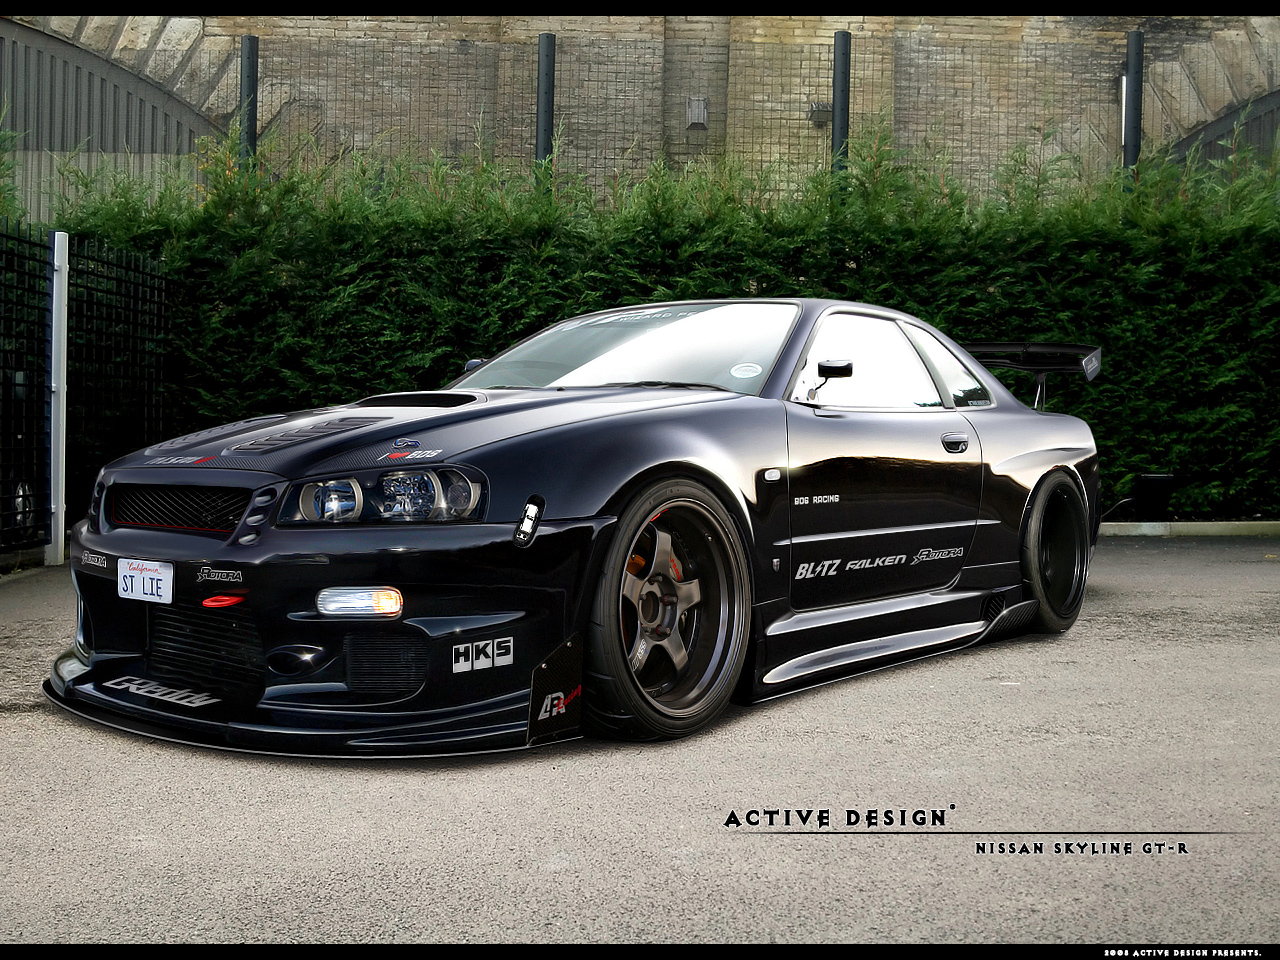 Nissan picture skylines